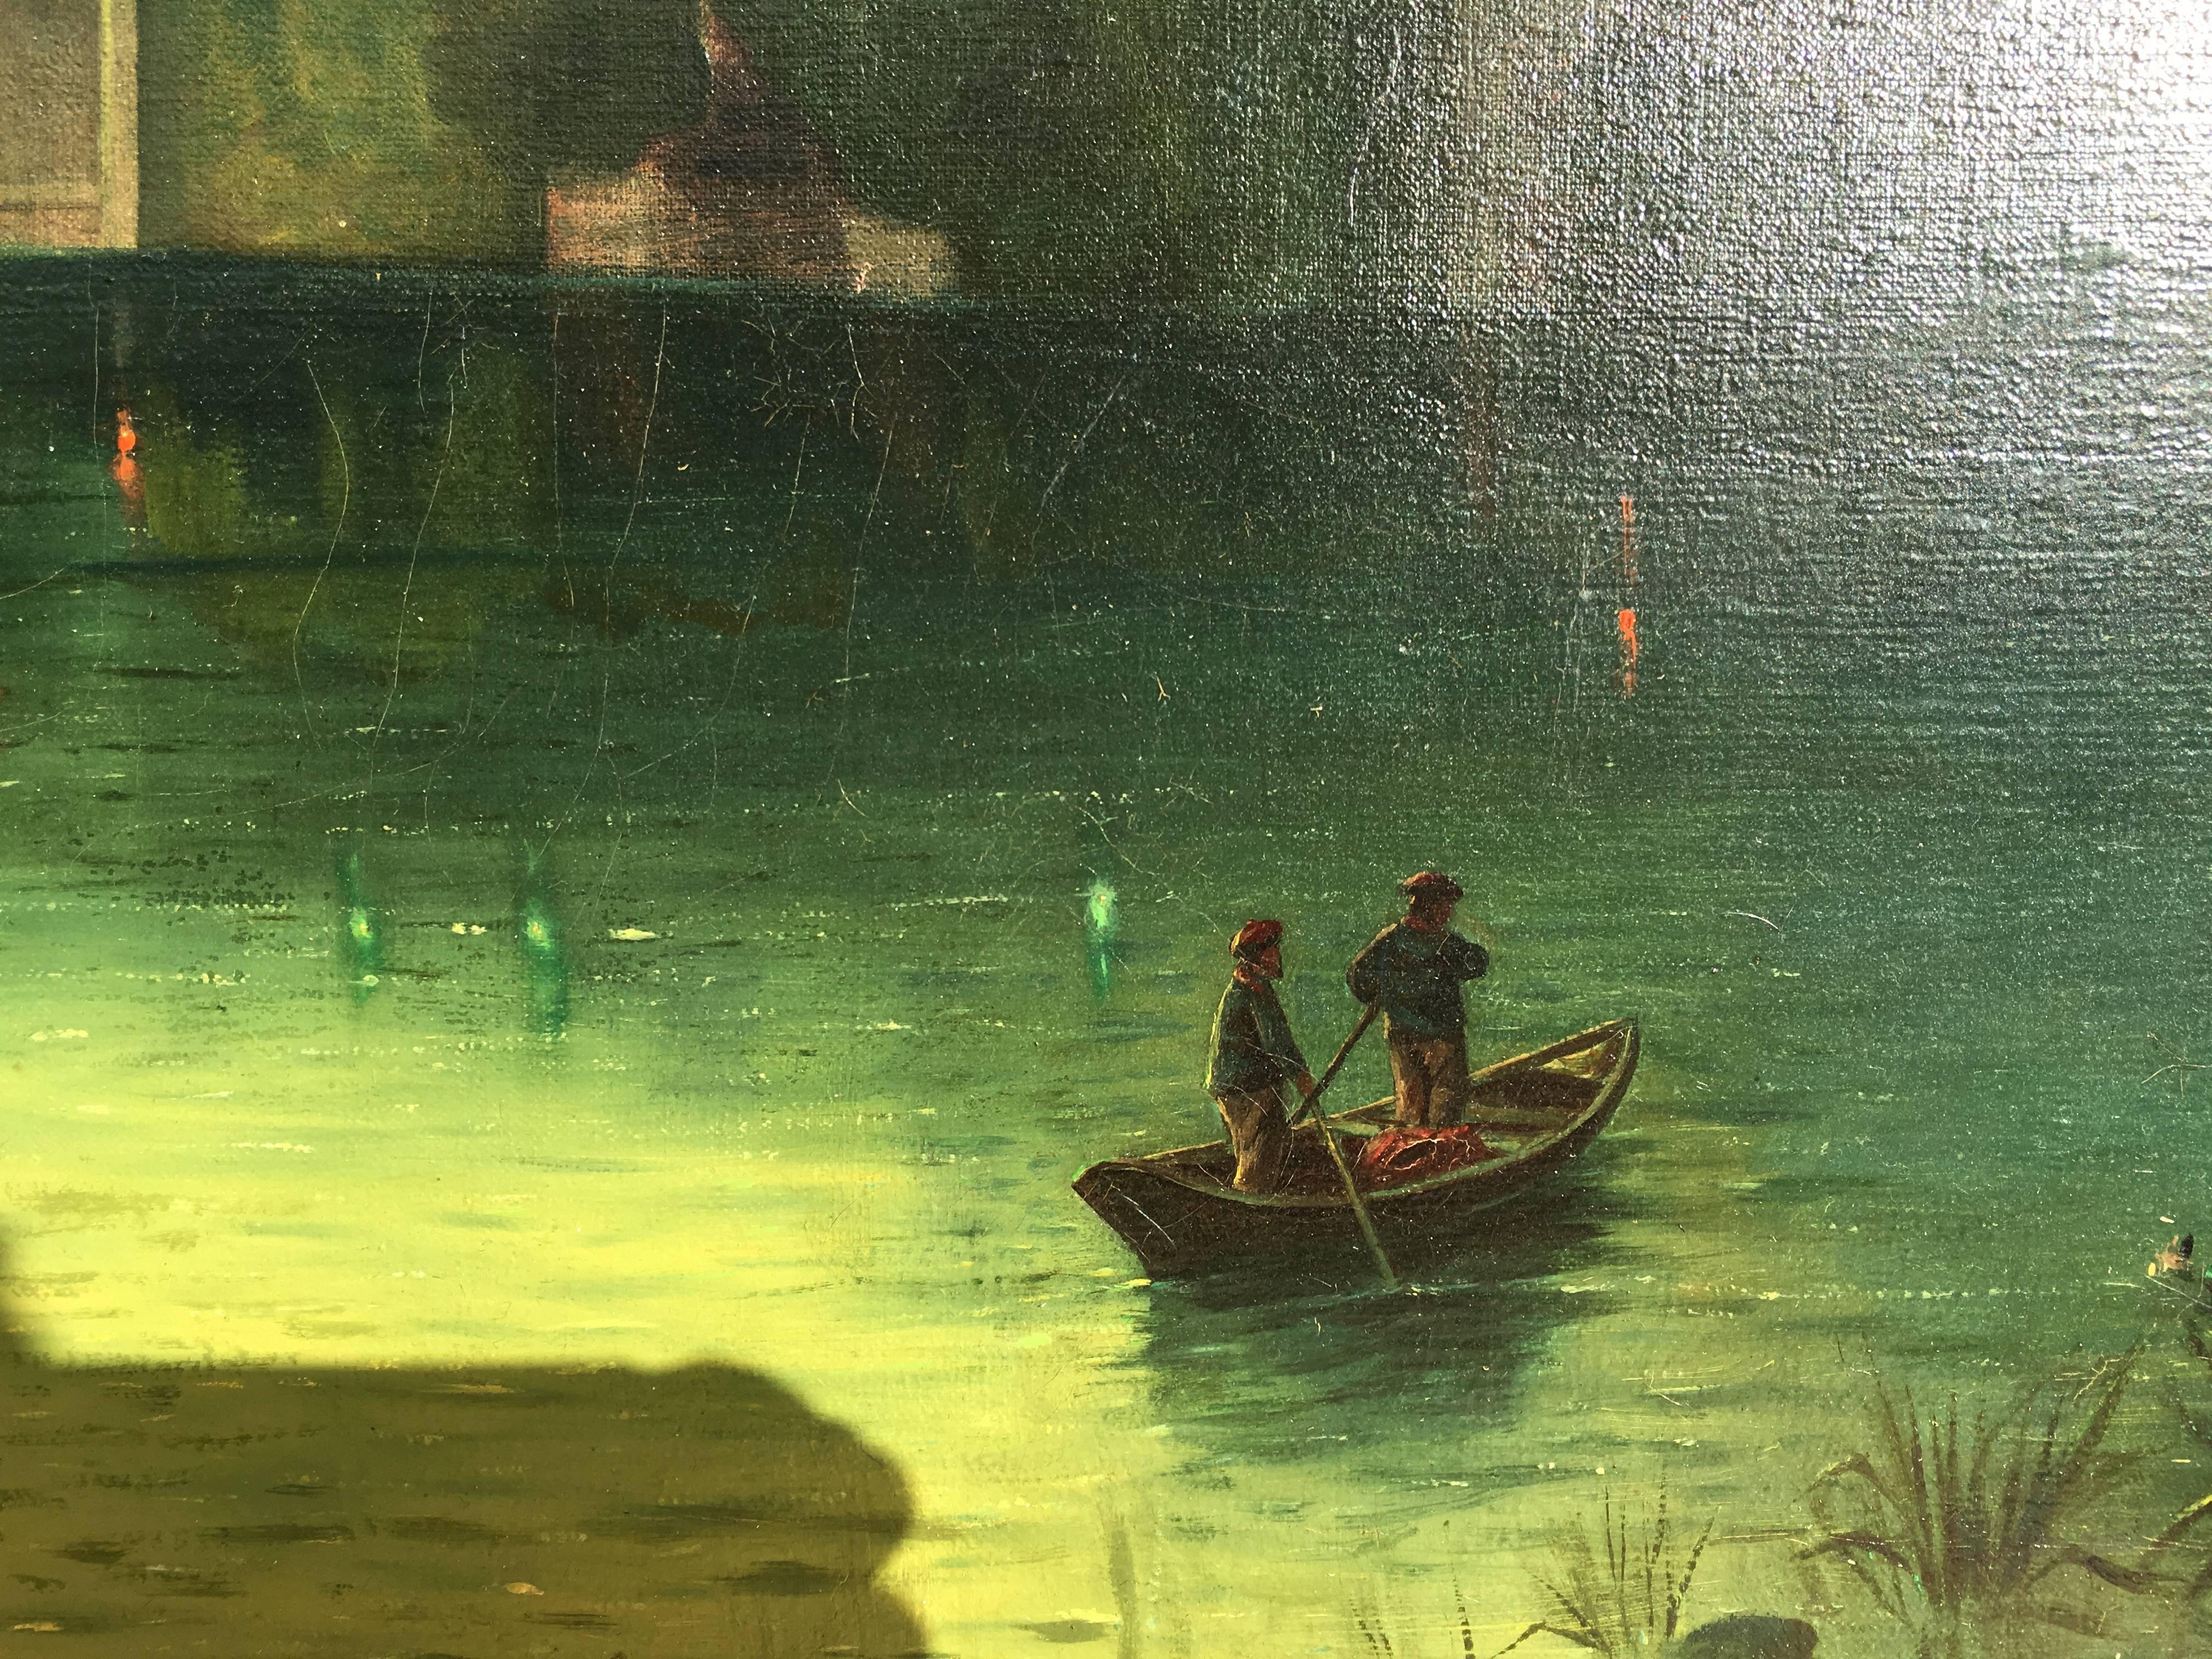 Palace of the Legion of Honor (Lagoon Night Time Scene with Small Boats) - Brown Landscape Painting by Ella Tanner Smith